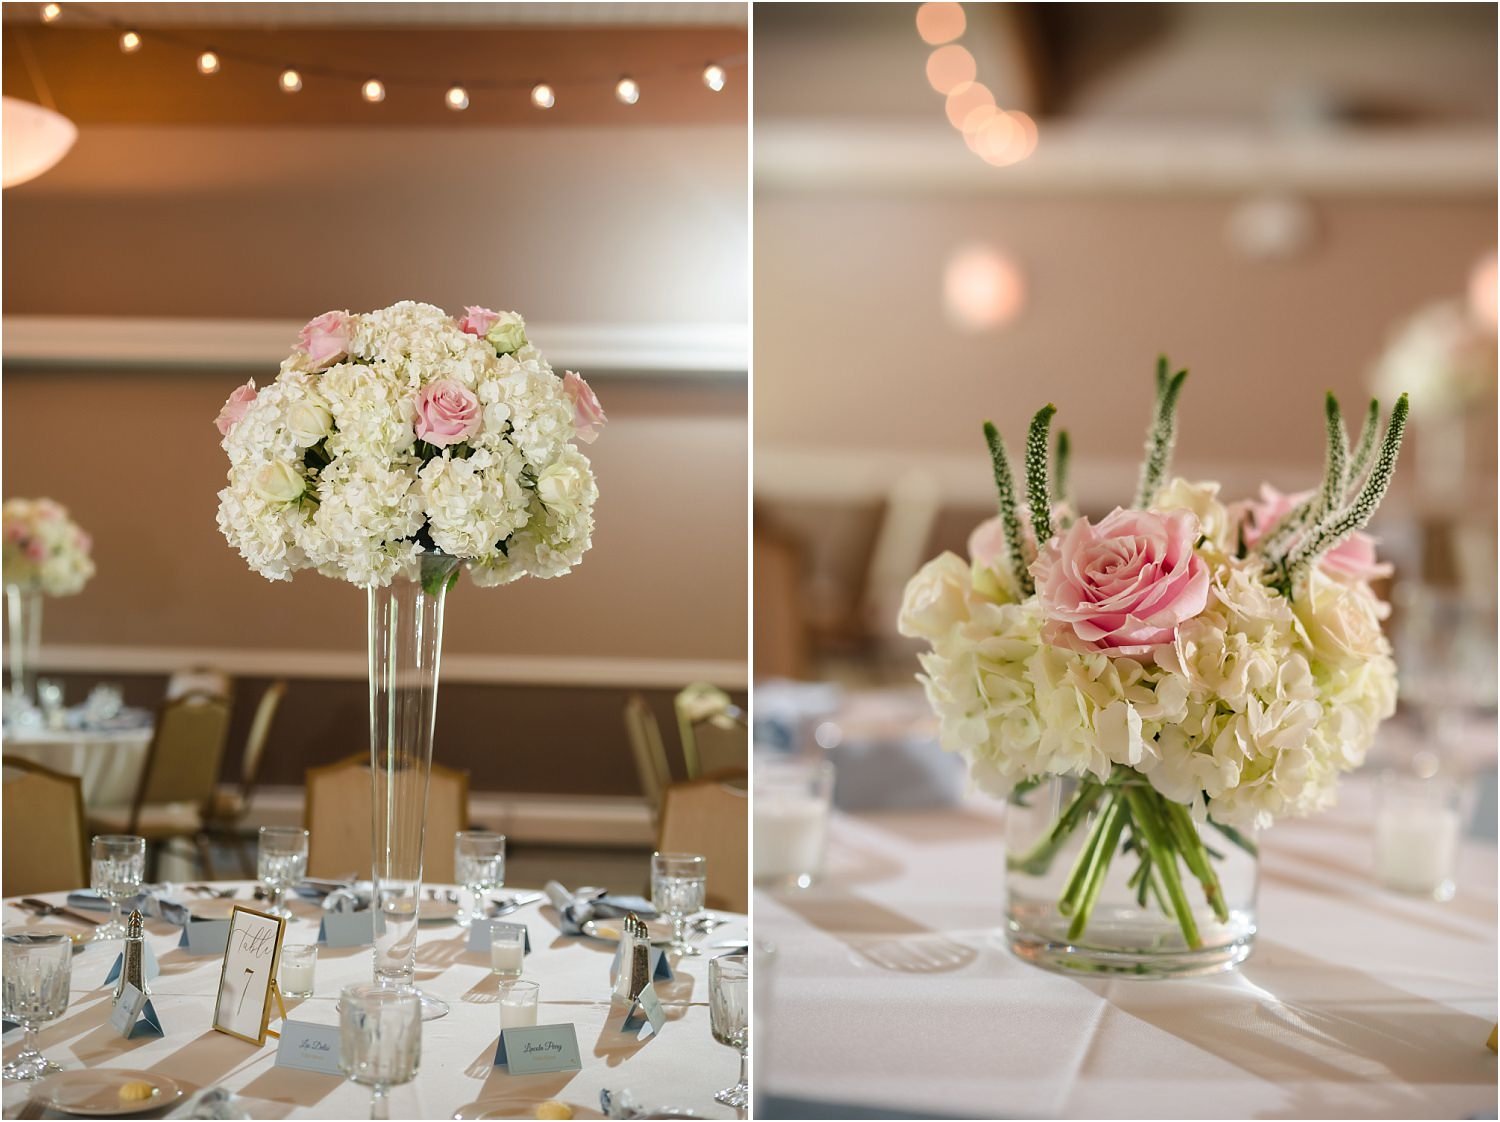  Detail photos of blush and white centerpieces in a classic historic venue.  